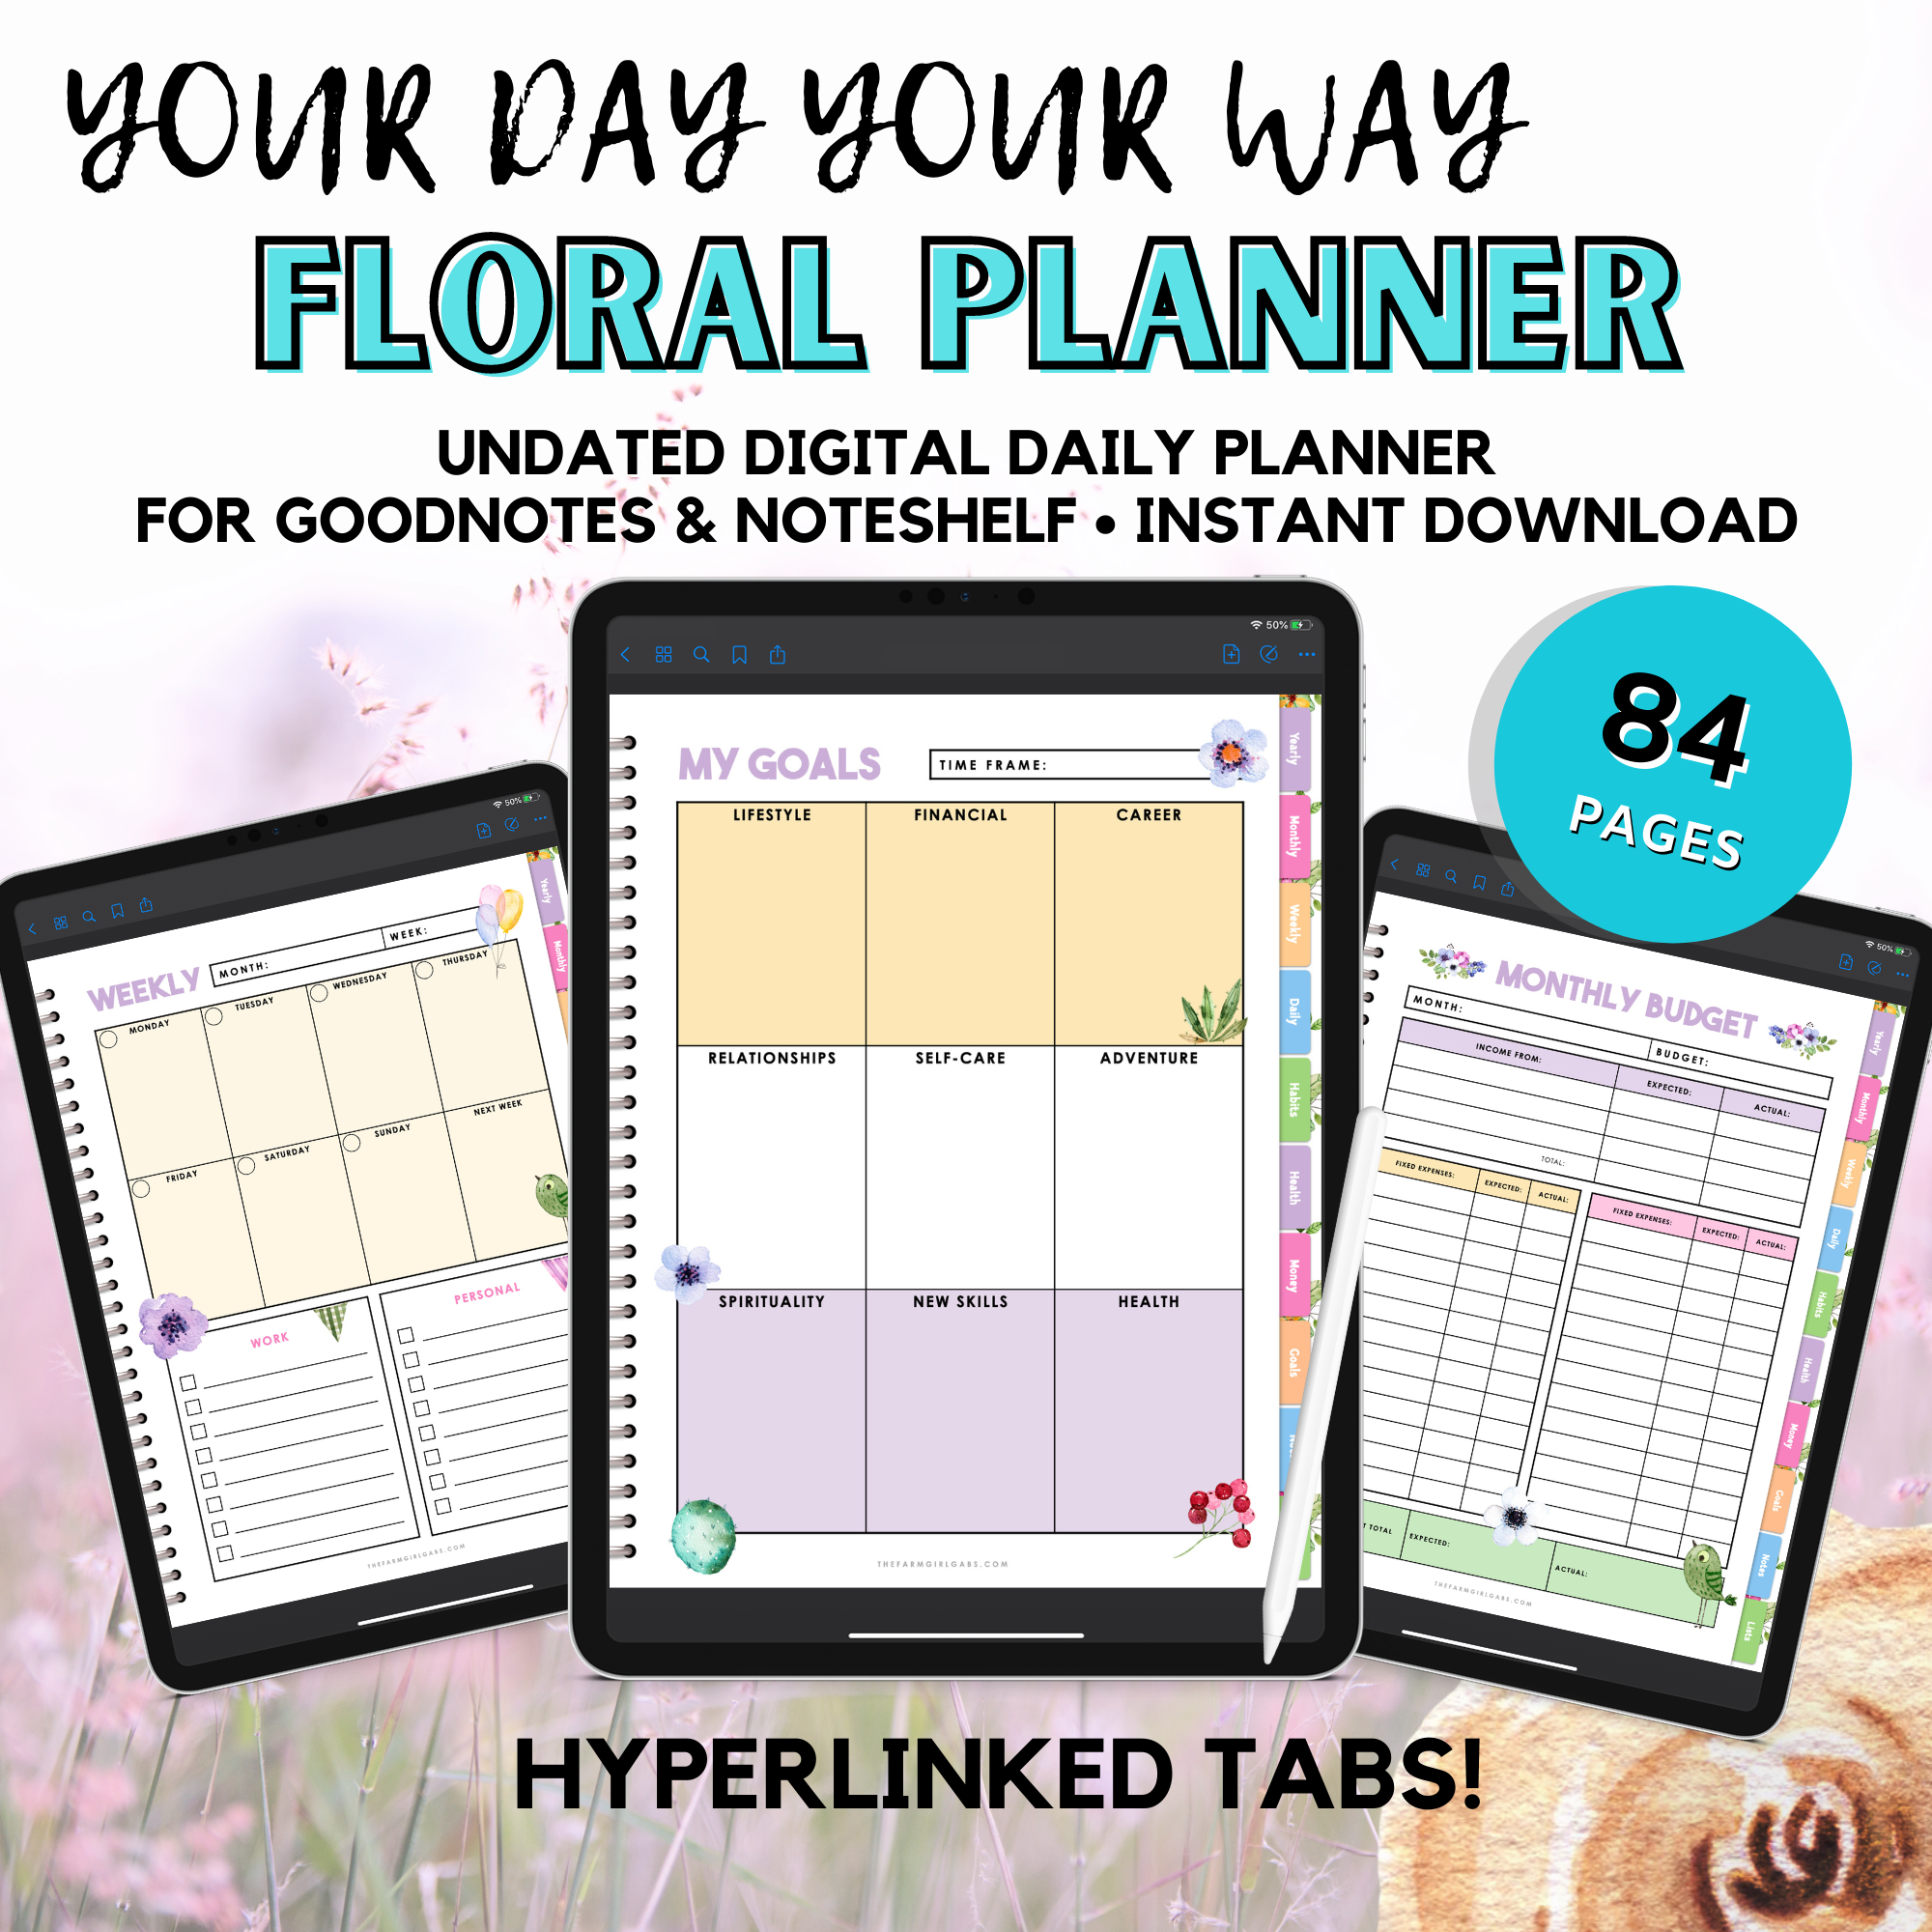 Plan your day your way. This Floral Digital Daily Planner will help you keep track of daily tasks, goals, finances, and appointments. Download this daily planner and use it on an iPad with Goodnotes or Noteshelf. 